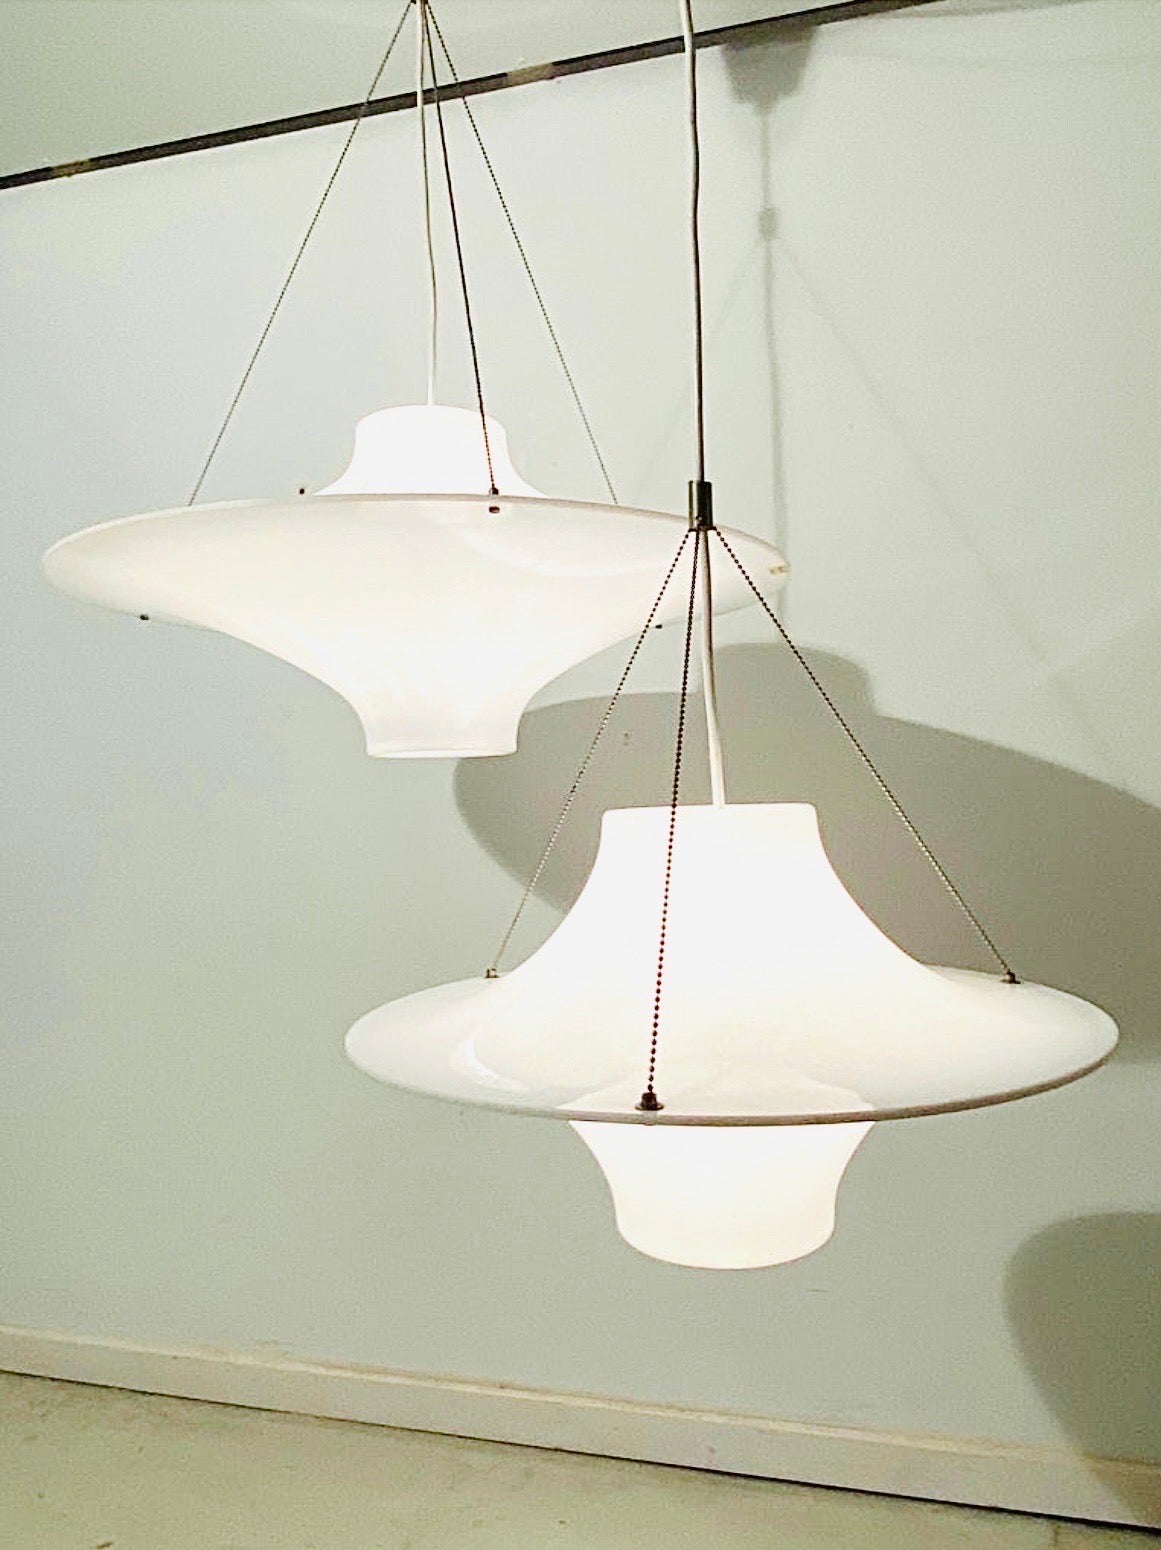 Beautiful space age pendant lamp - 1 available - with a diameter of 70cm.